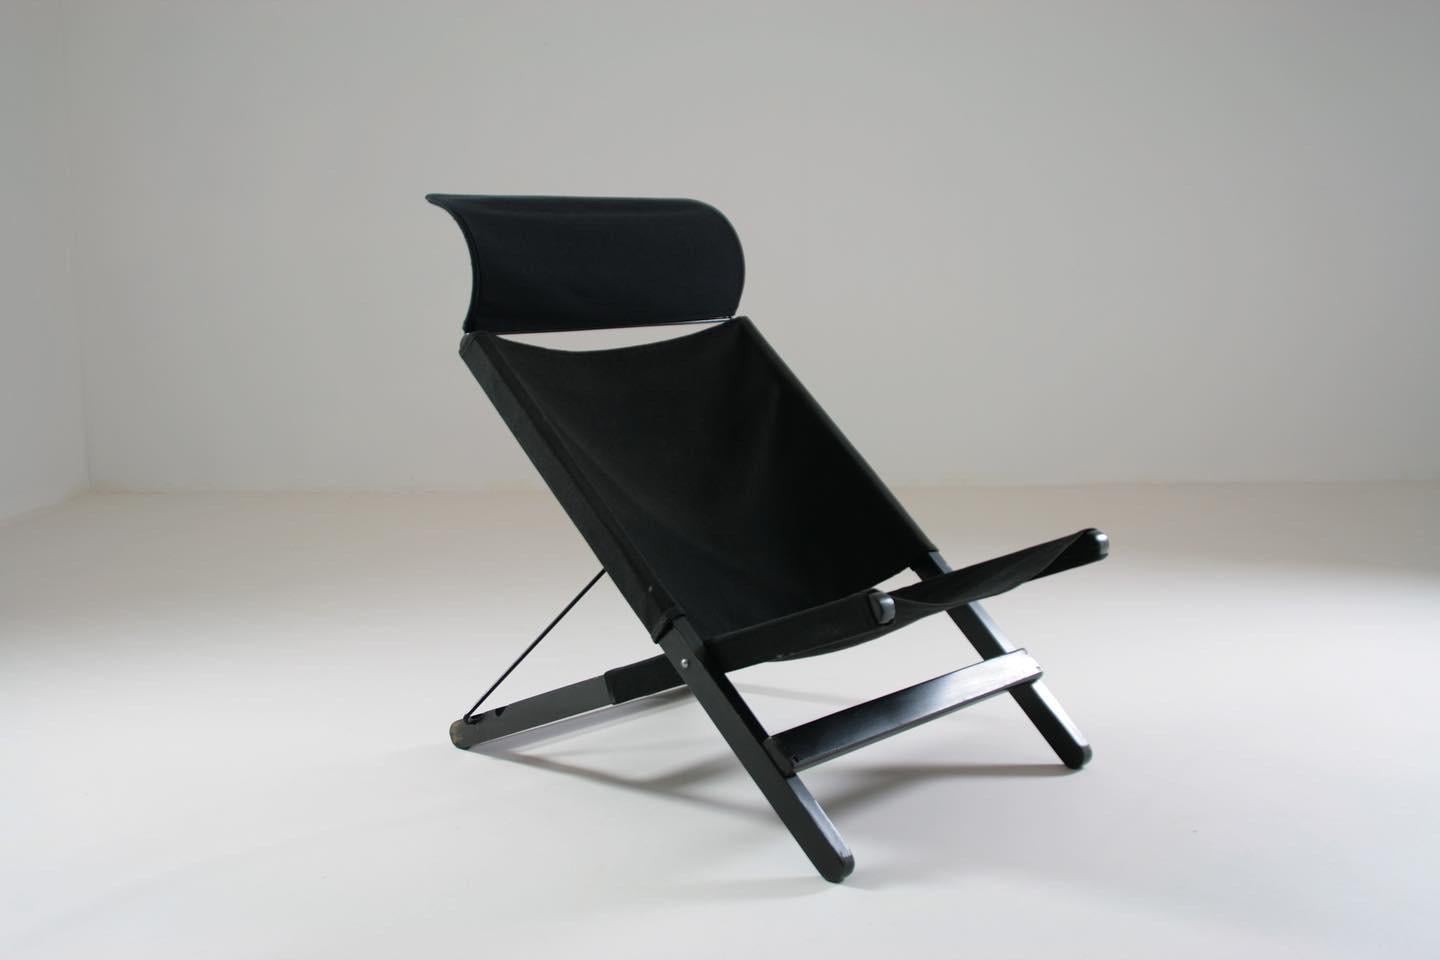 Swedish Wood and Canvas Folding Lounge Chair Attributed to Tord Bjorklund for Ikea, 1990